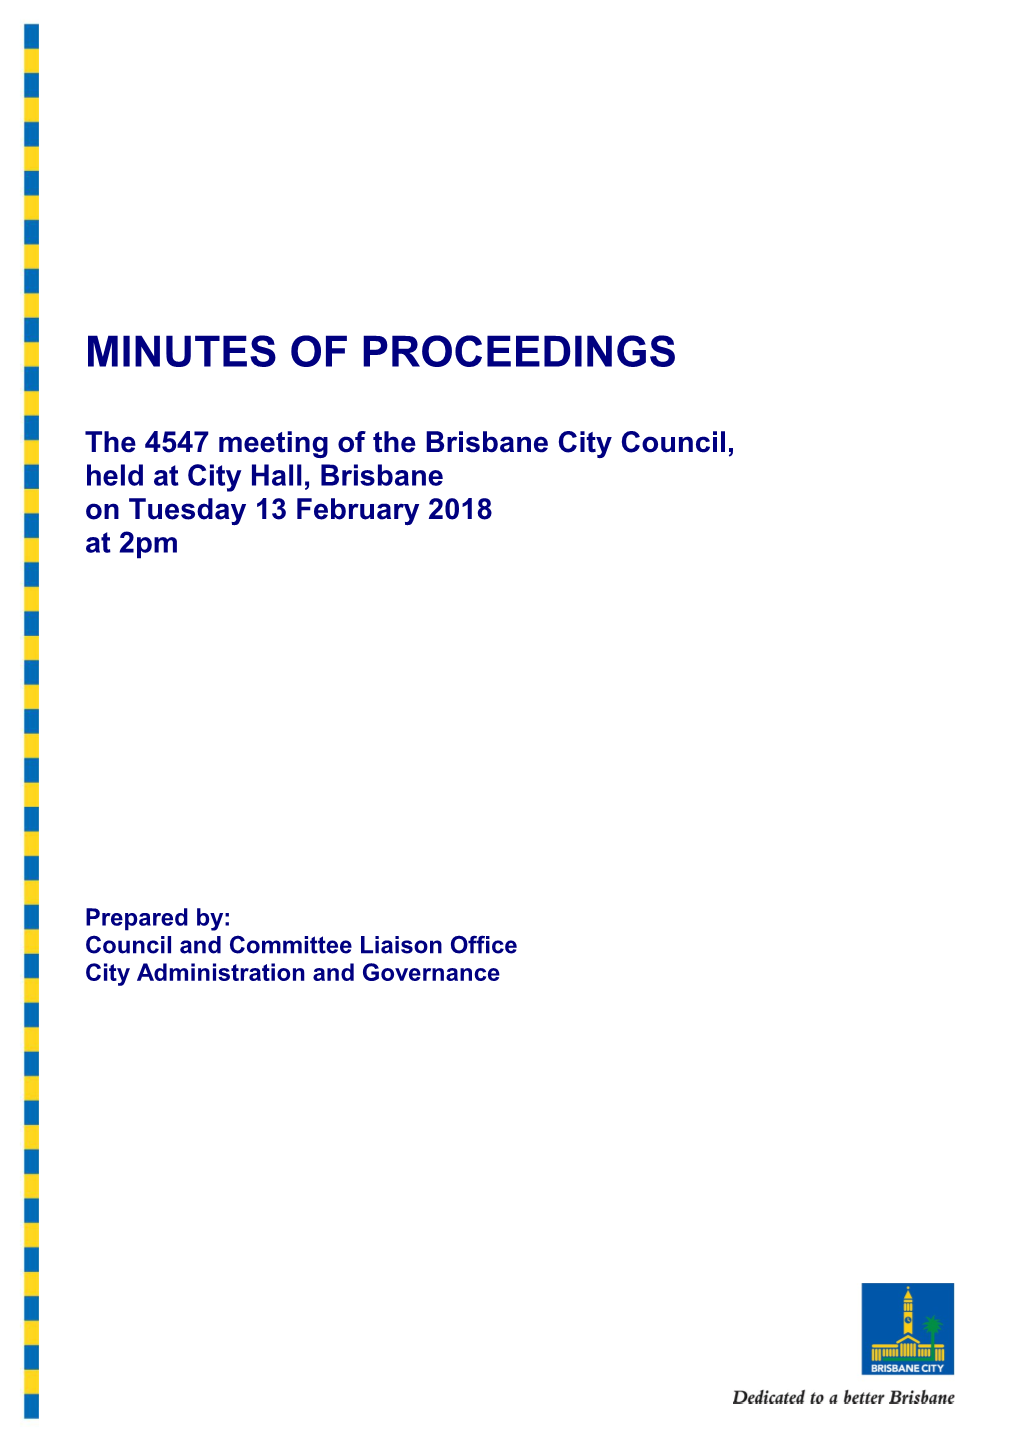 The 4547 Meeting of the Brisbane City Council